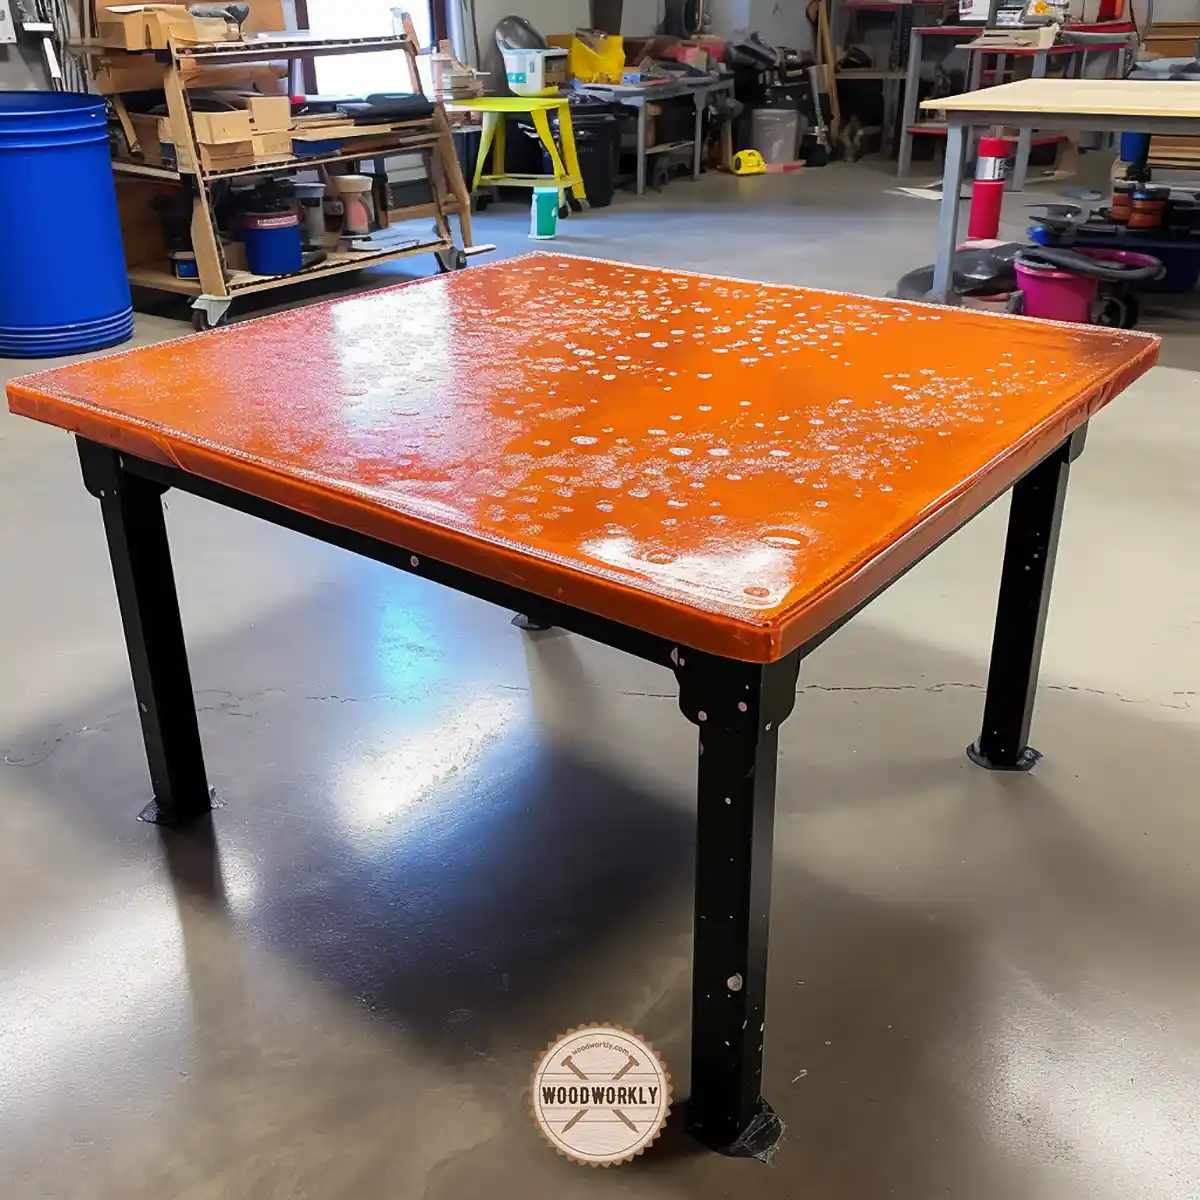 Air bubbles coming out from the polyurethane surface due to incomplete drying of stain below